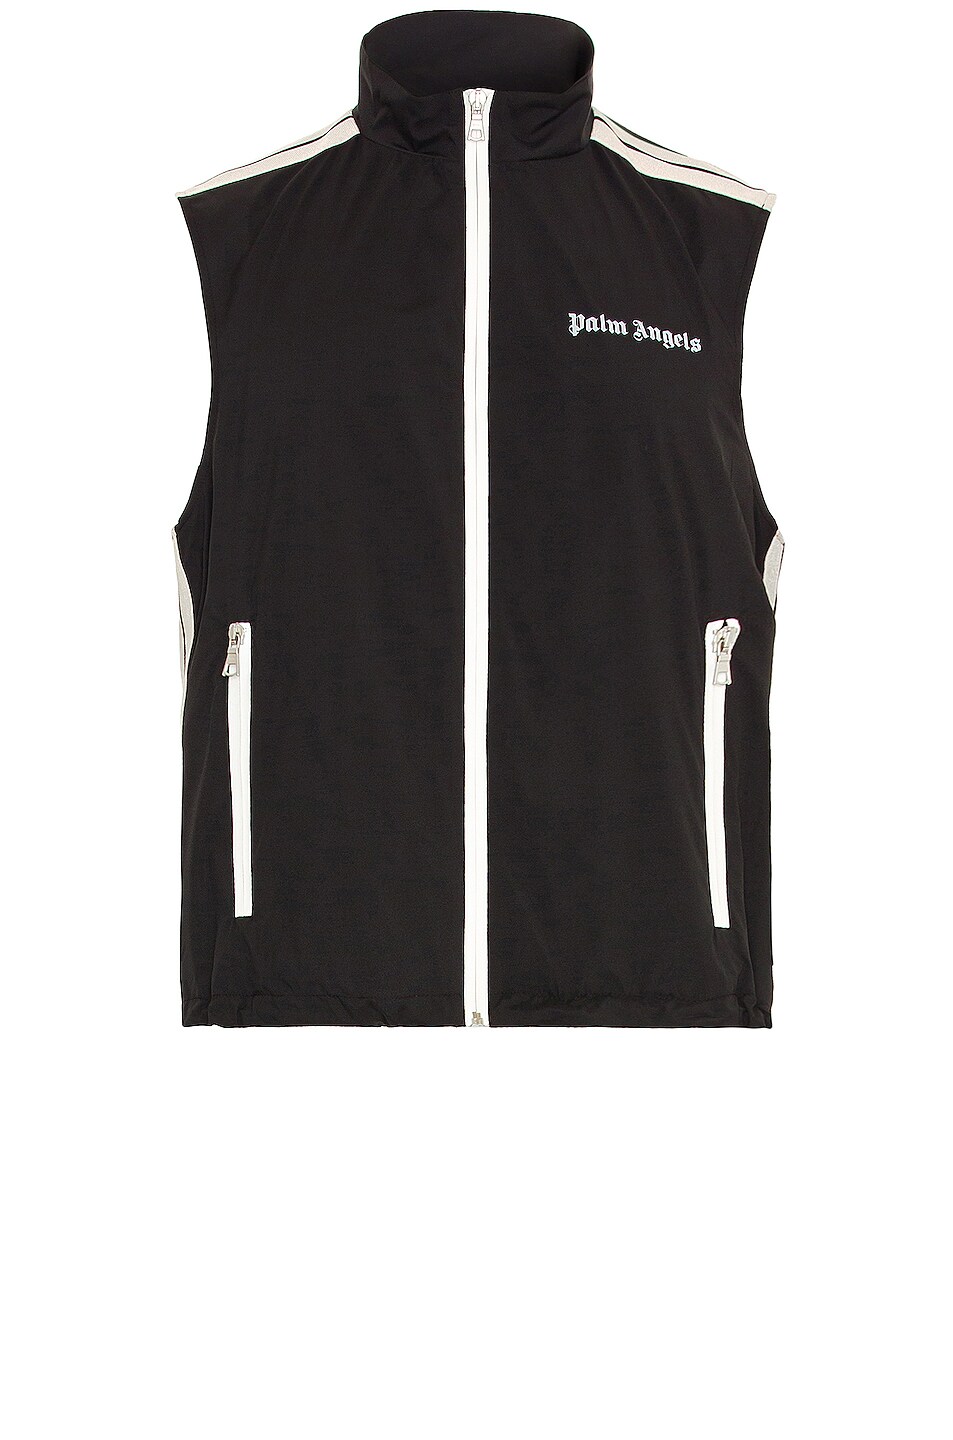 Image 1 of Palm Angels Classic Logo Vest in Black in Black